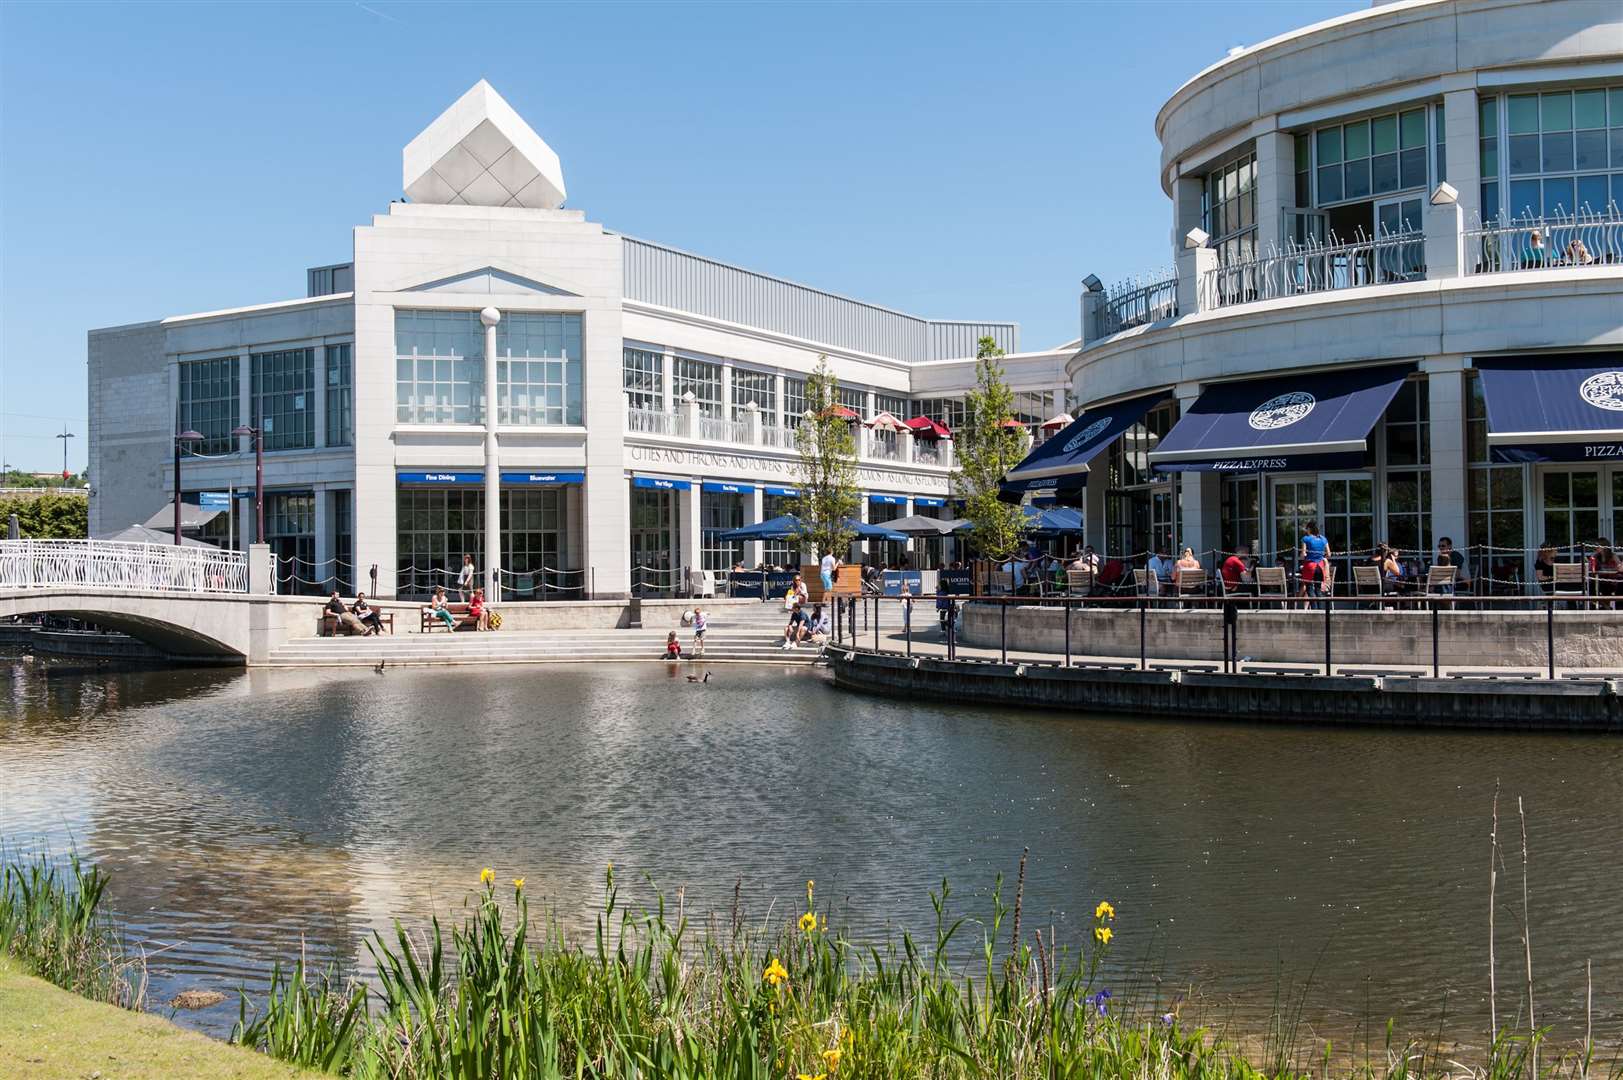 The plans for Bluewater have been fiercely opposed